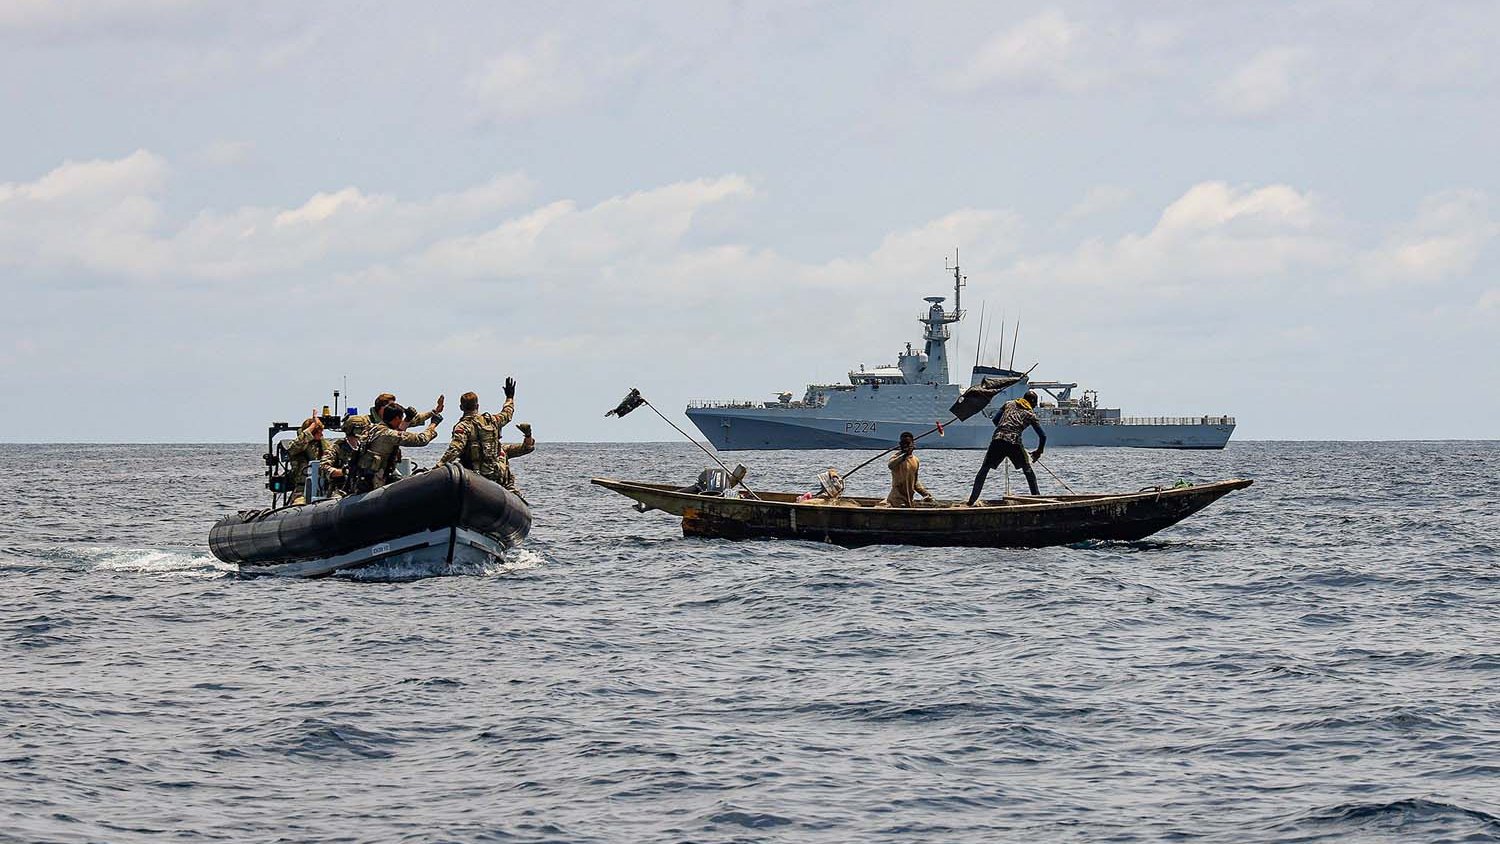 Royal Navy joins international fight against piracy along vital trade route